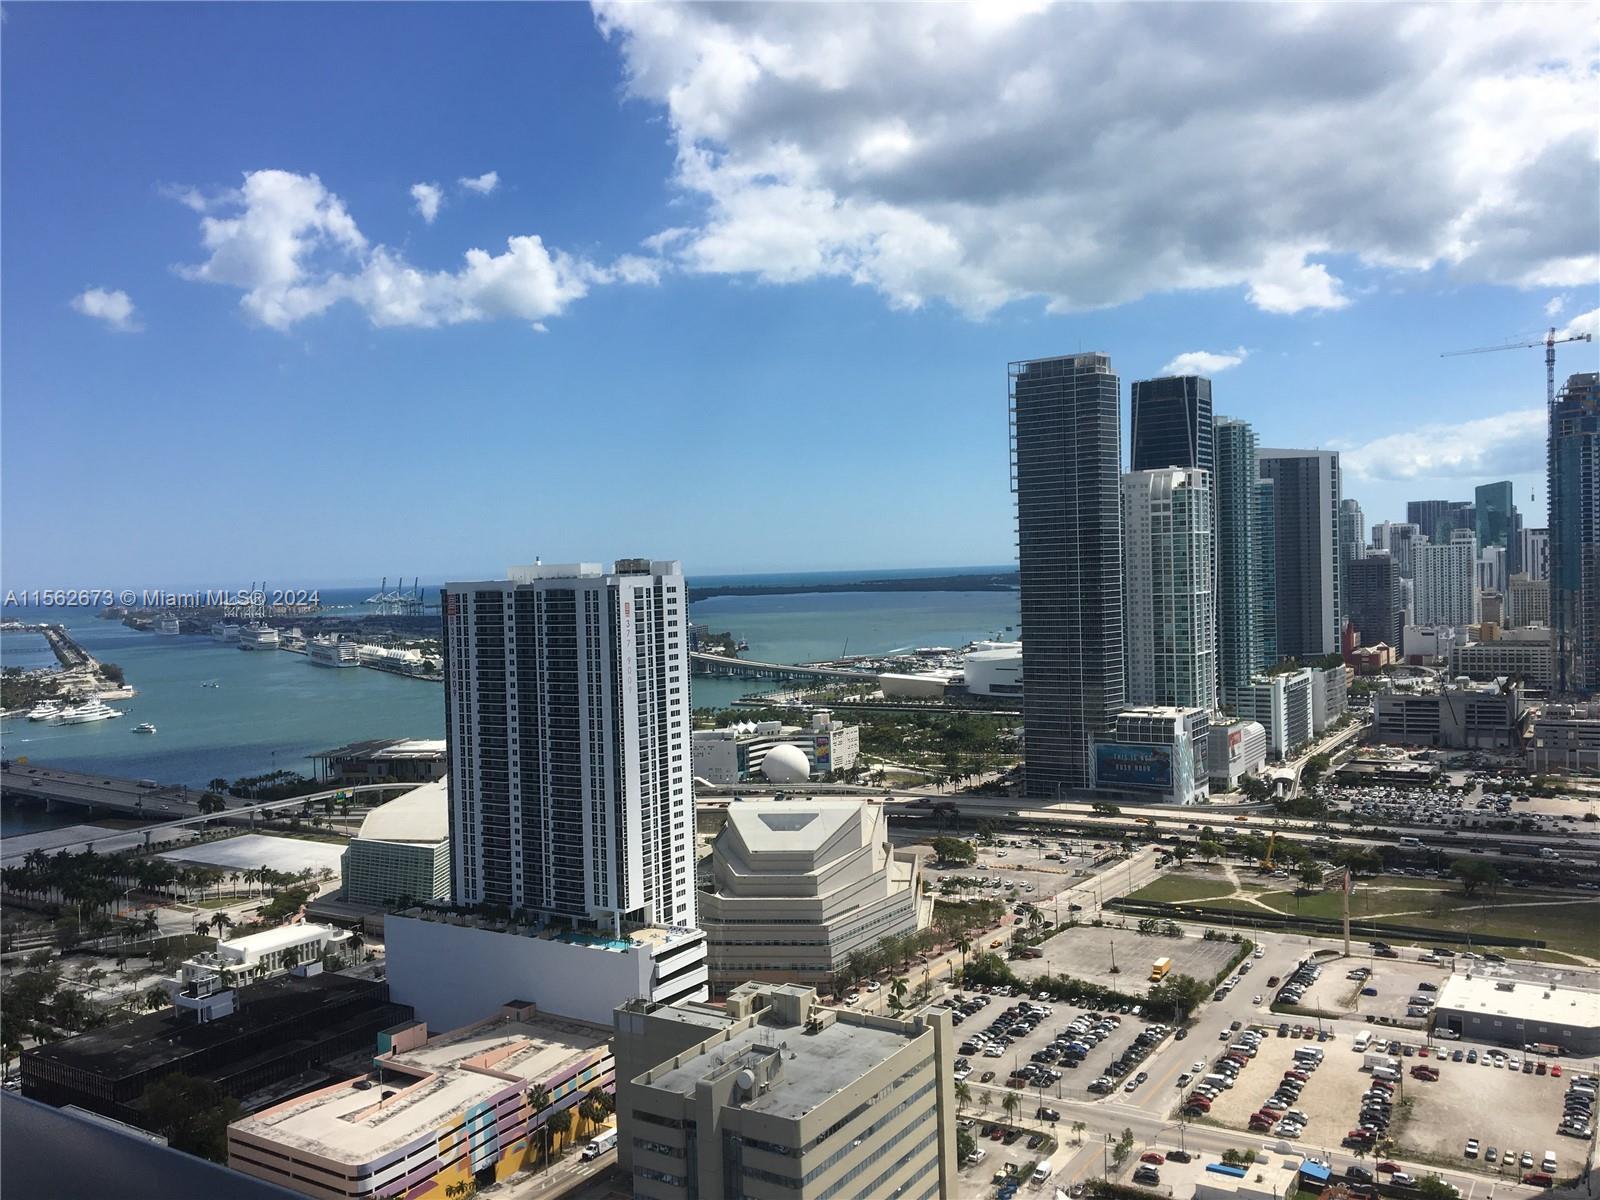 VERY DESIRABLE LINE WITH AMAZING VIEWS AT CANVAS MIAMI.COME TO SEE THIS 1 BEDROOM + DEN. PORCELAIN FLOORS. WINDOWS TREATMENT AND CUSTOM CLOSETS. STAINLESS STEEL APPLIANCES. AMAZING WATER & CITY VIEWS. SOFA IN DEN CONVERTS INTO A BED; FULLY EQUIPPED KITCHEN. TOP NOTCH BUILDING AMENITIES SUCH AS CARDIO AND WEIGHT FACILITY, YOGA, AEROBIC, MASSAGE, SAUNA, MULTI-PURPOSE SOCIAL ROOM, POOLS AND A GREAT DEAL OF RESTAURANTS CLOSE BY. BASIC CABLE AND INTERNET INCLUDED. CURRENT TENANT IN PLACE LEAVING ON JUNE 6TH. BUILDING ALLOWS SHORT-TERM RENTS.